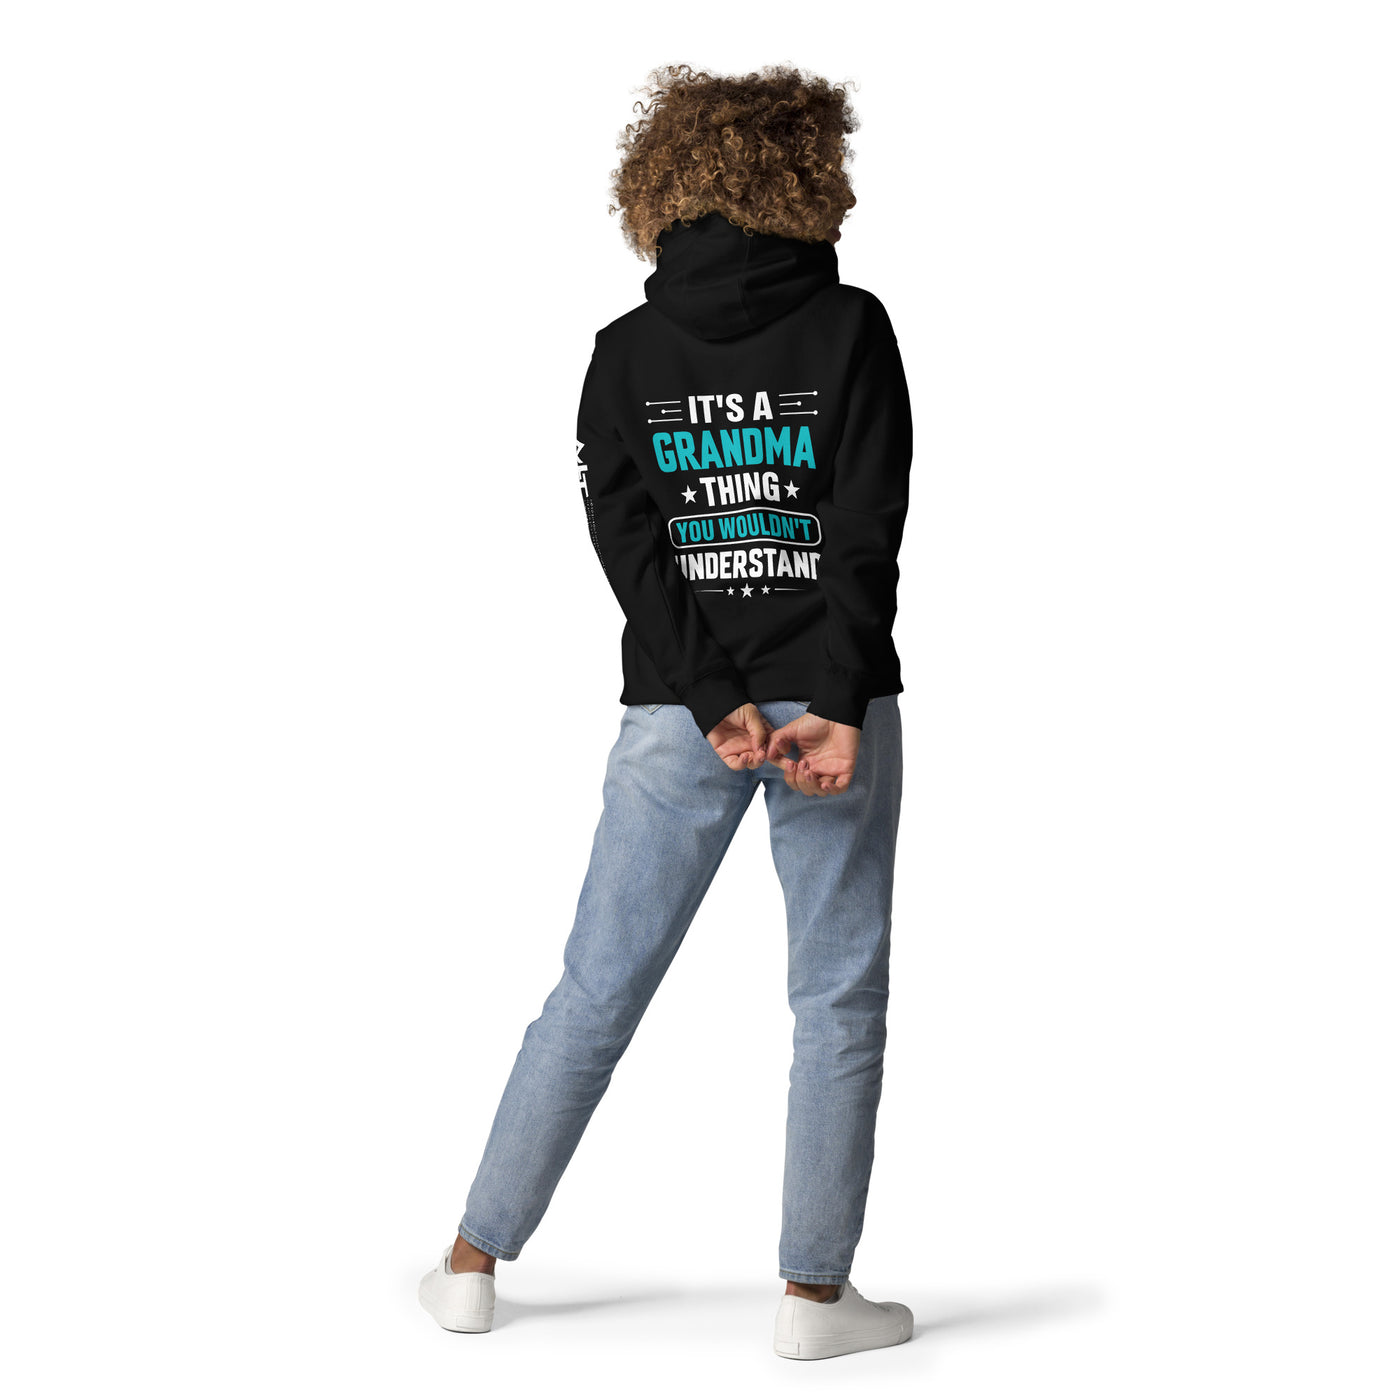 It's a Grandma Thing, you wouldn't Understand - Unisex Hoodie